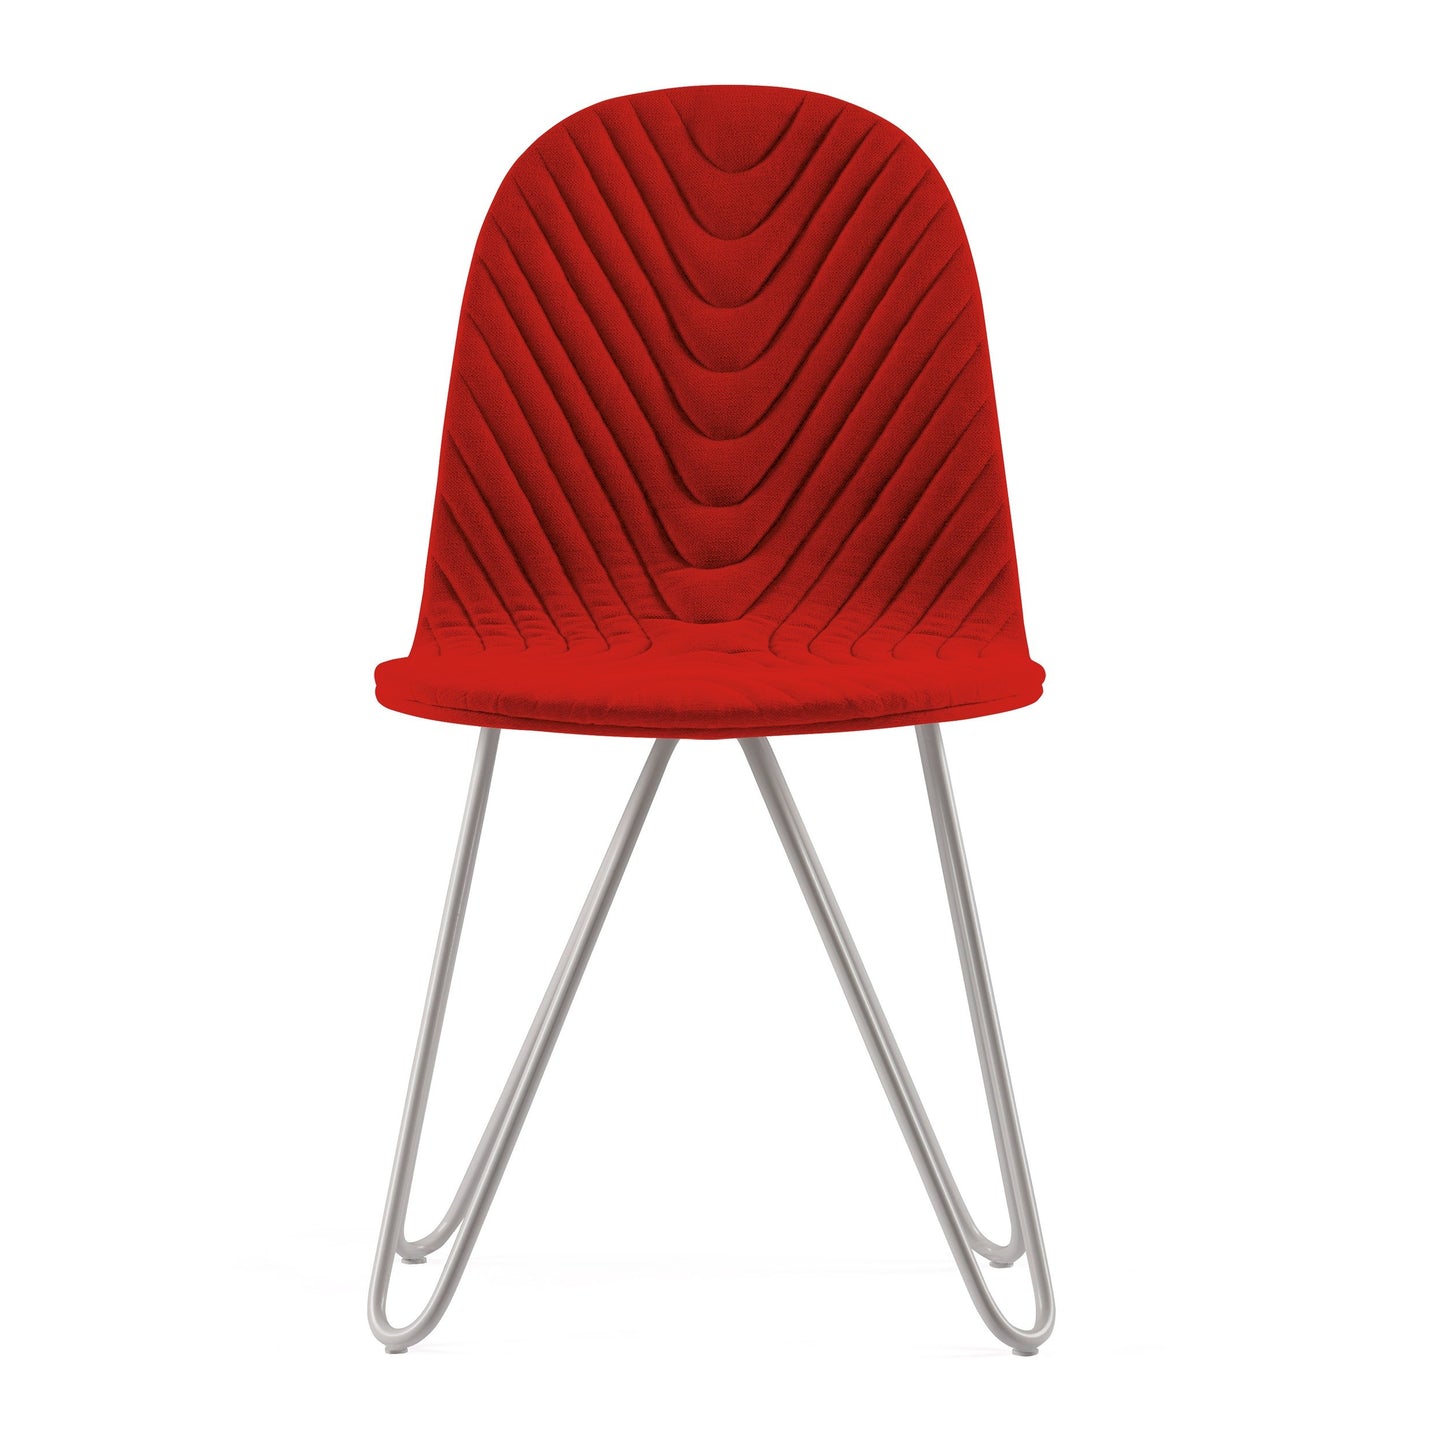 Chair Mannequin 03 - Red